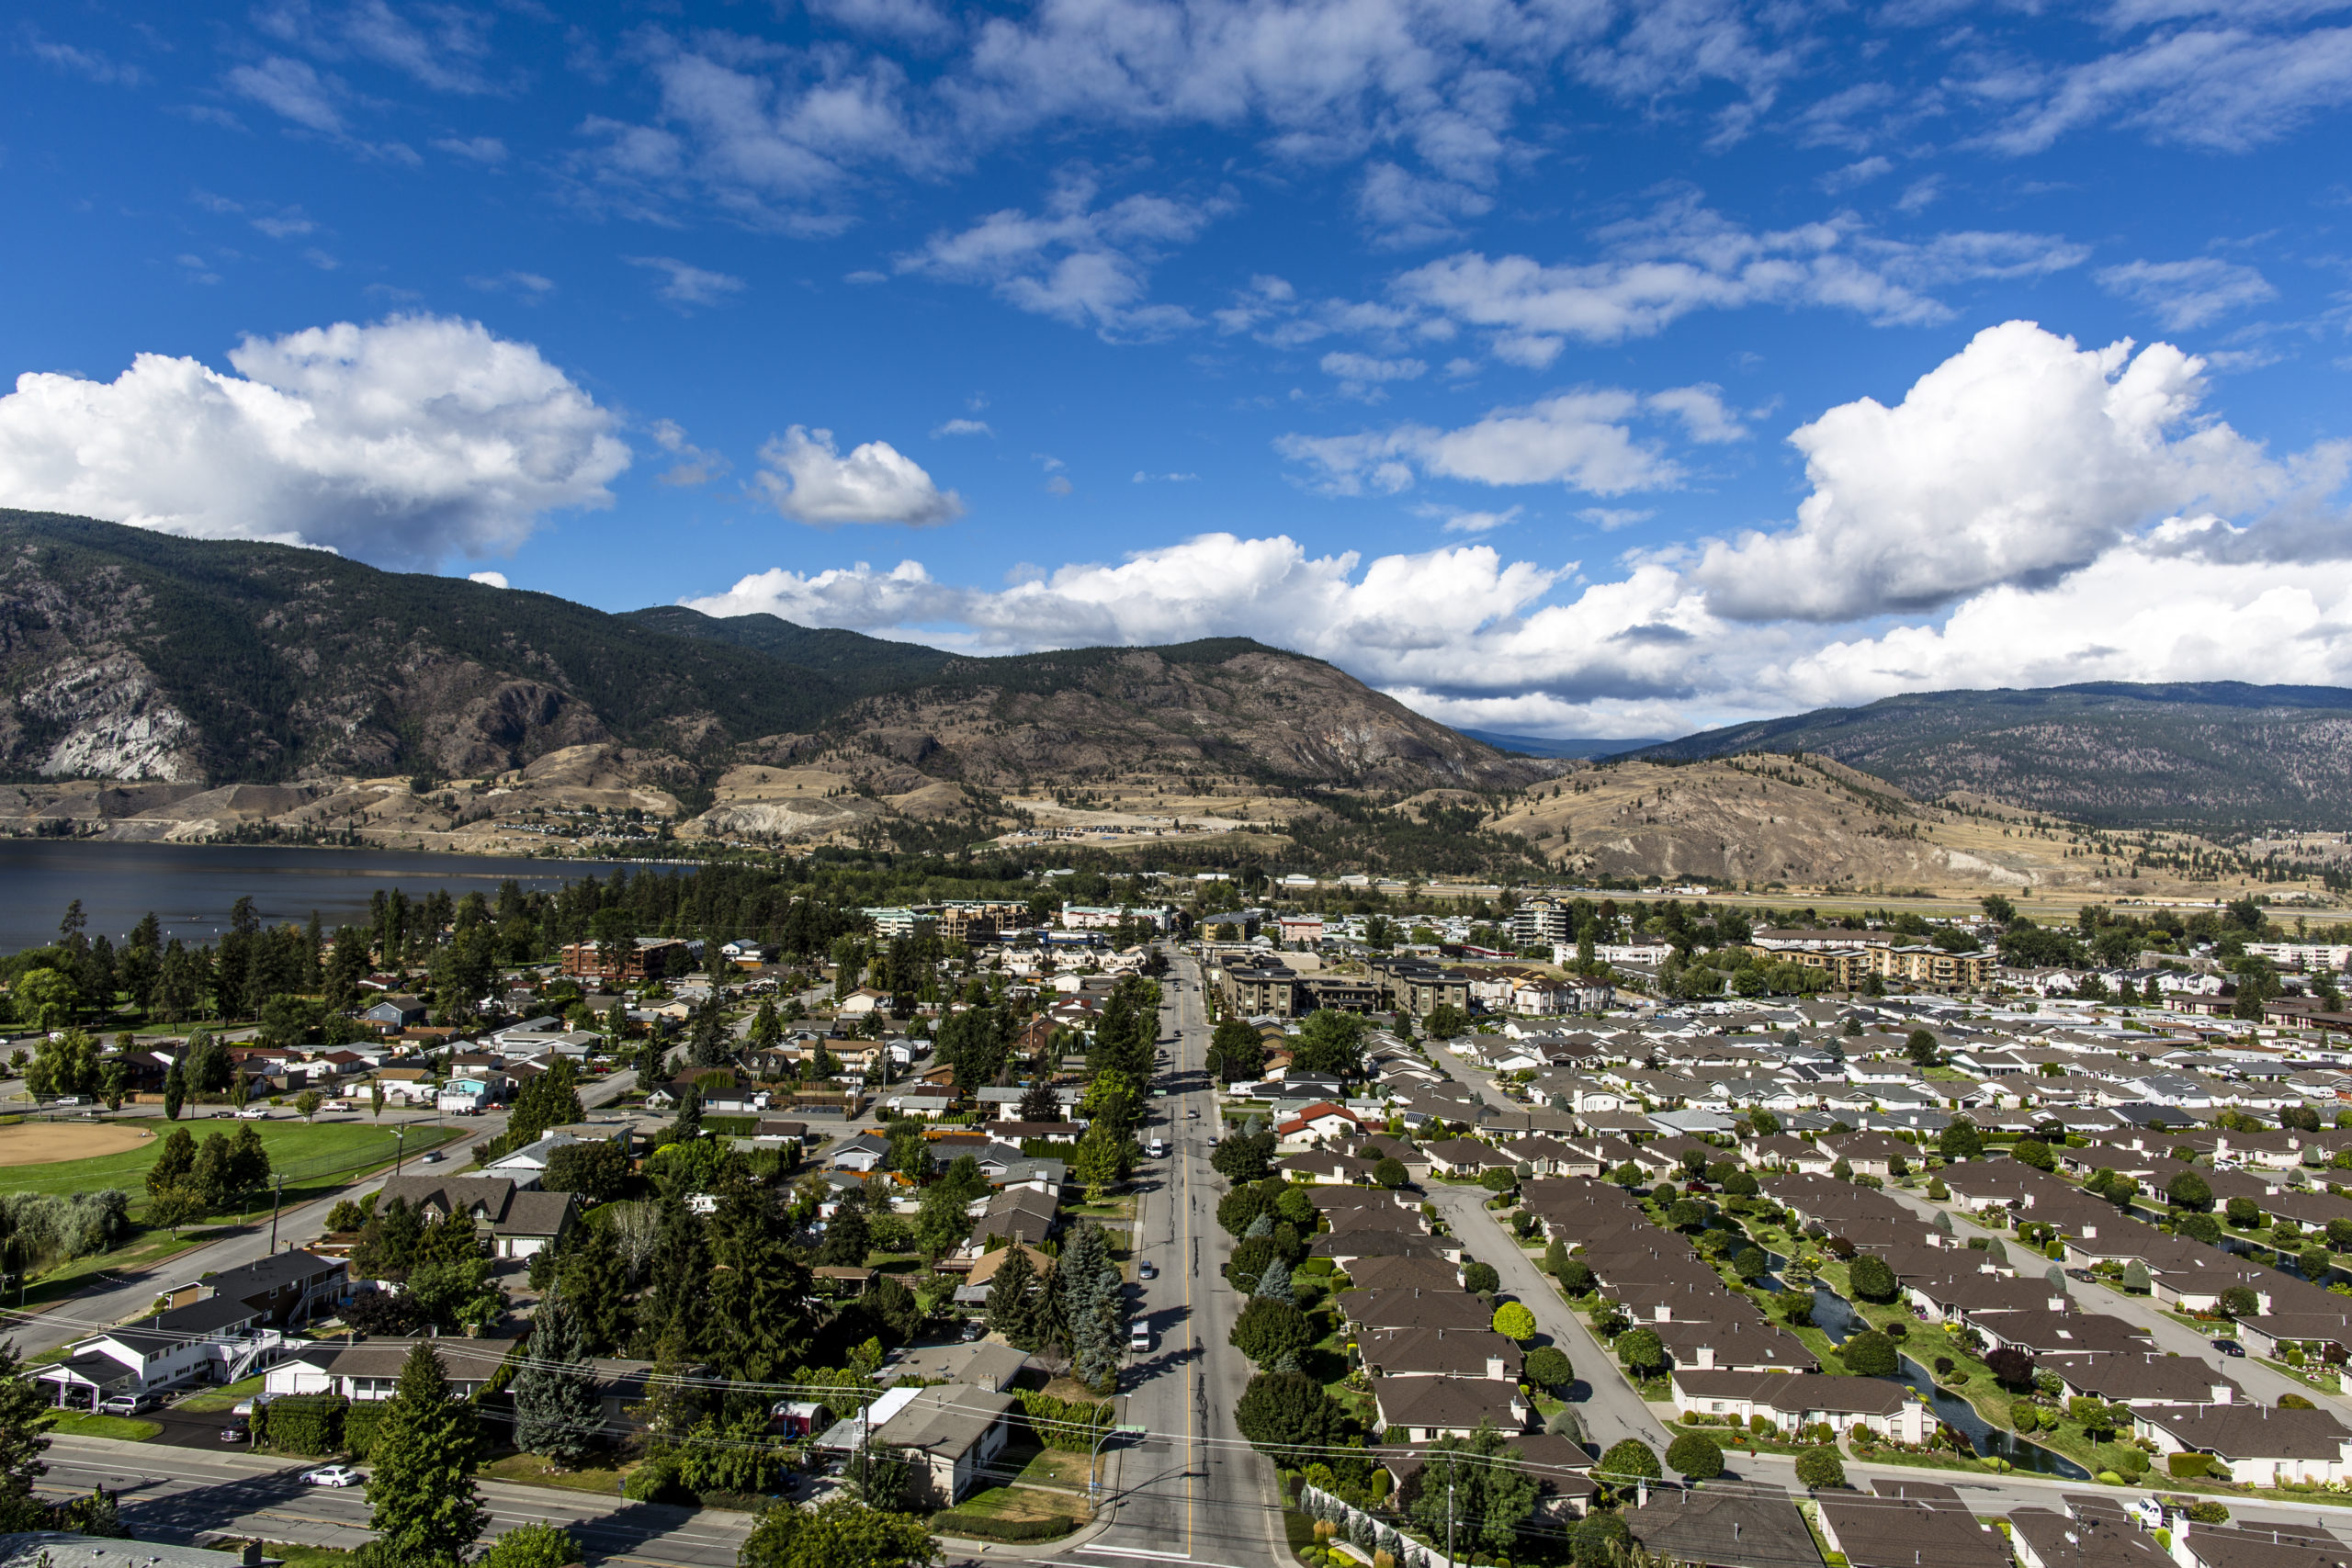 What's open for business in Penticton during covid-19?